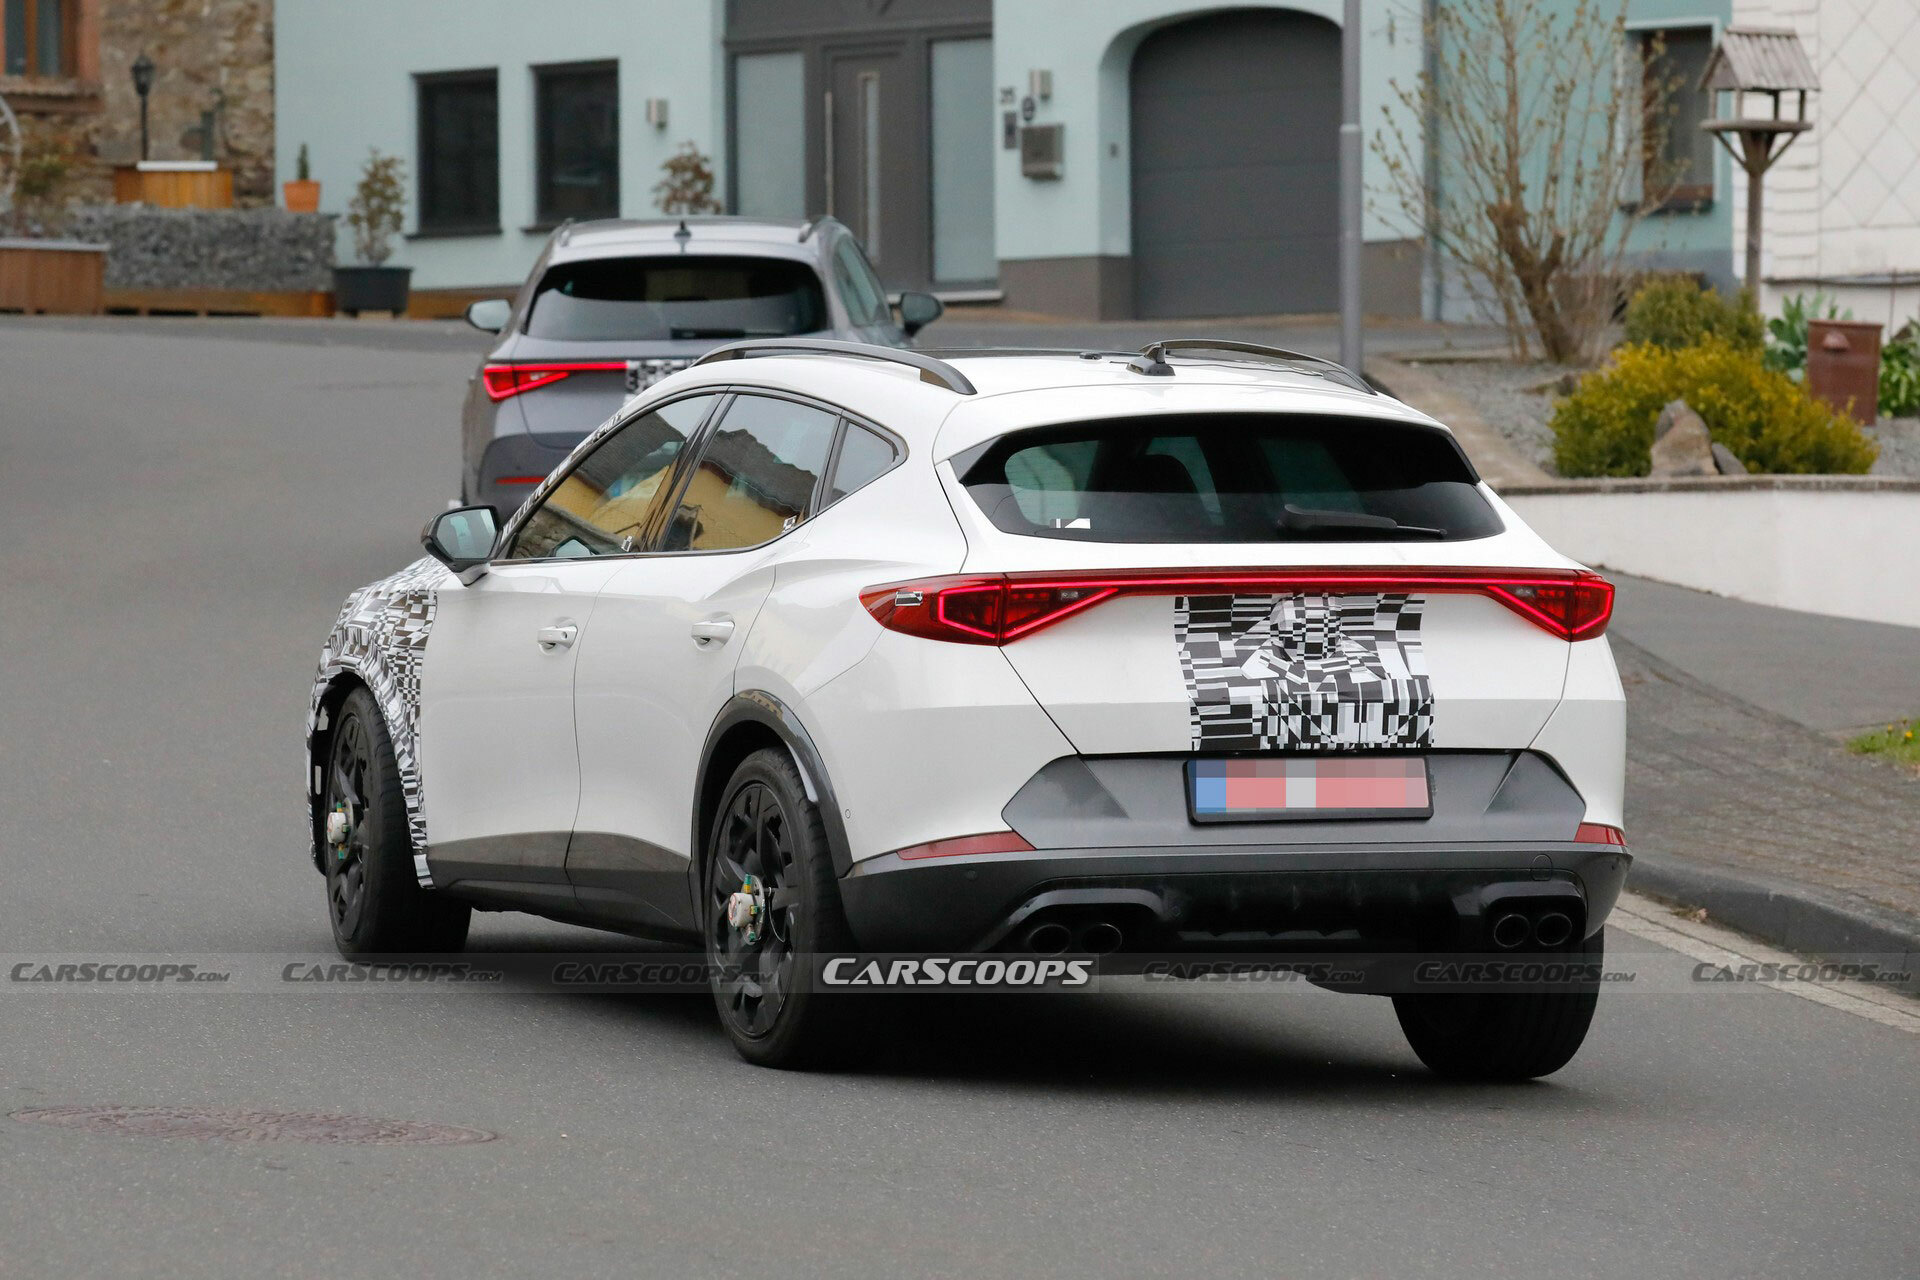 Cupra Formentor Facelift Rendering Shows Changes Based On Preview, Sighting